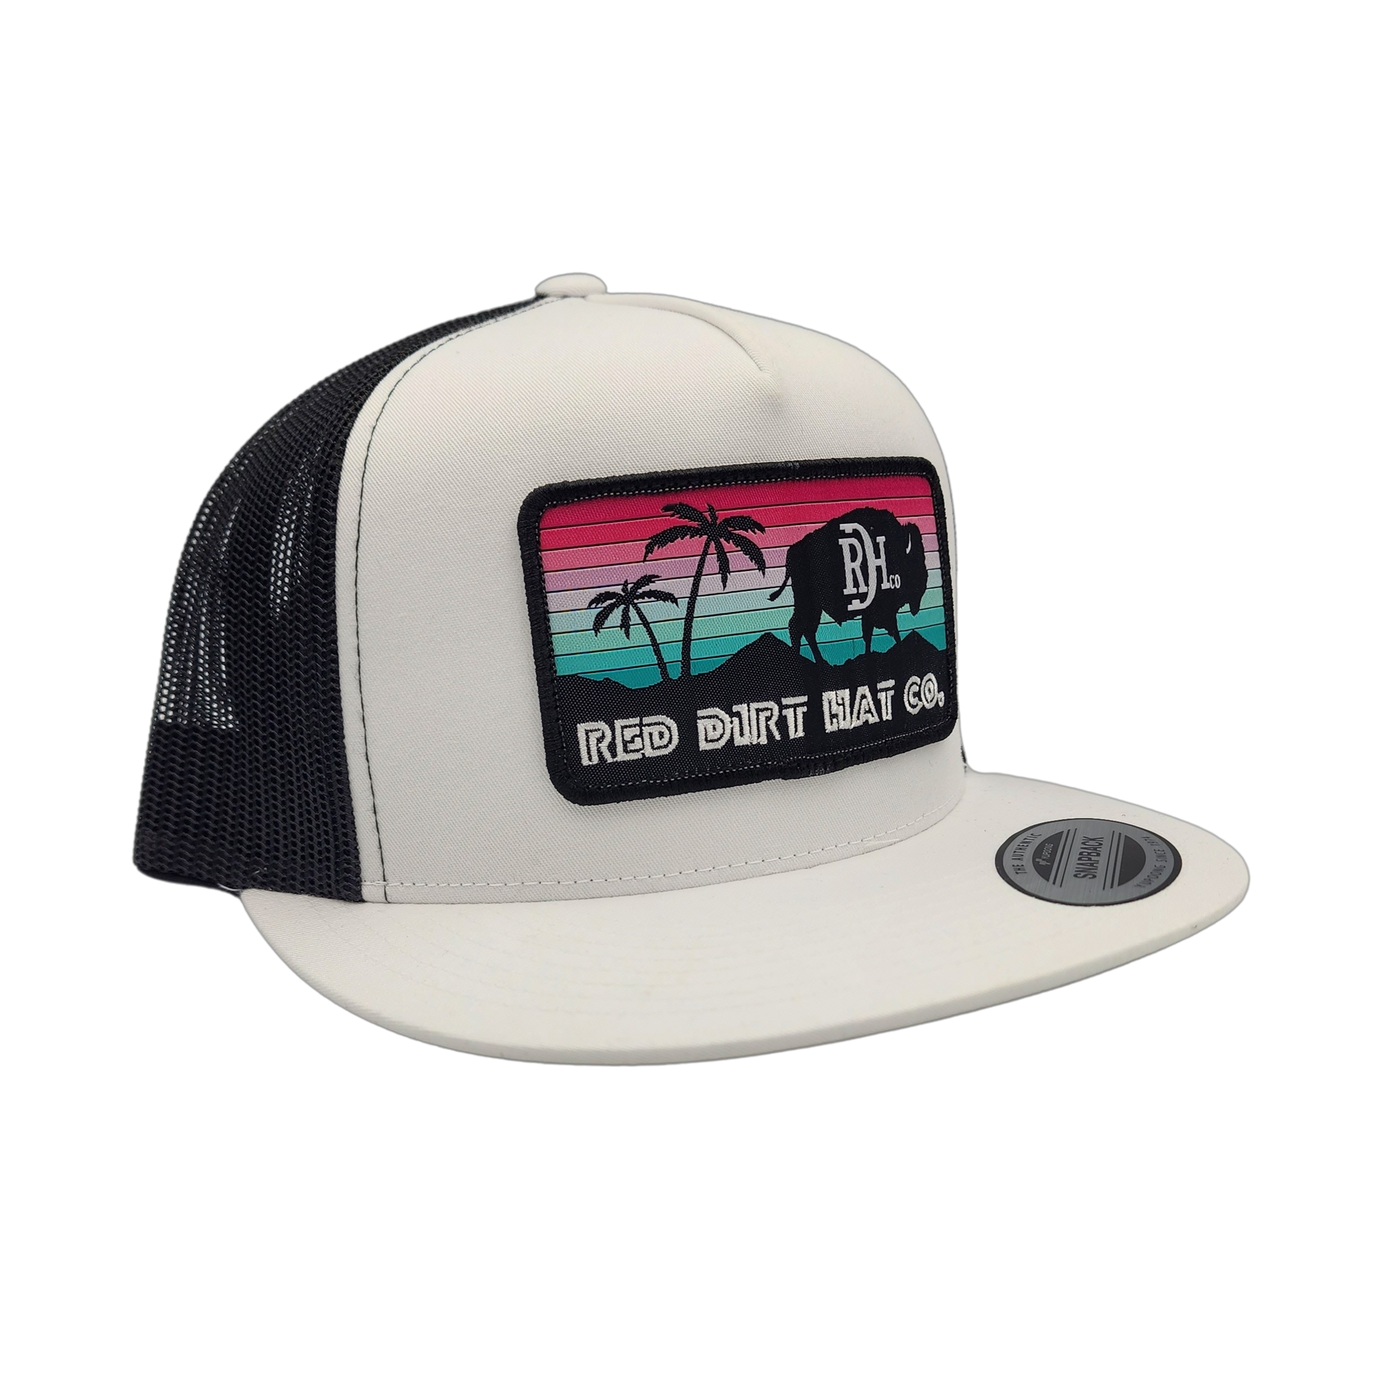 Red Dirt Hat Co. Miami Vice Hat